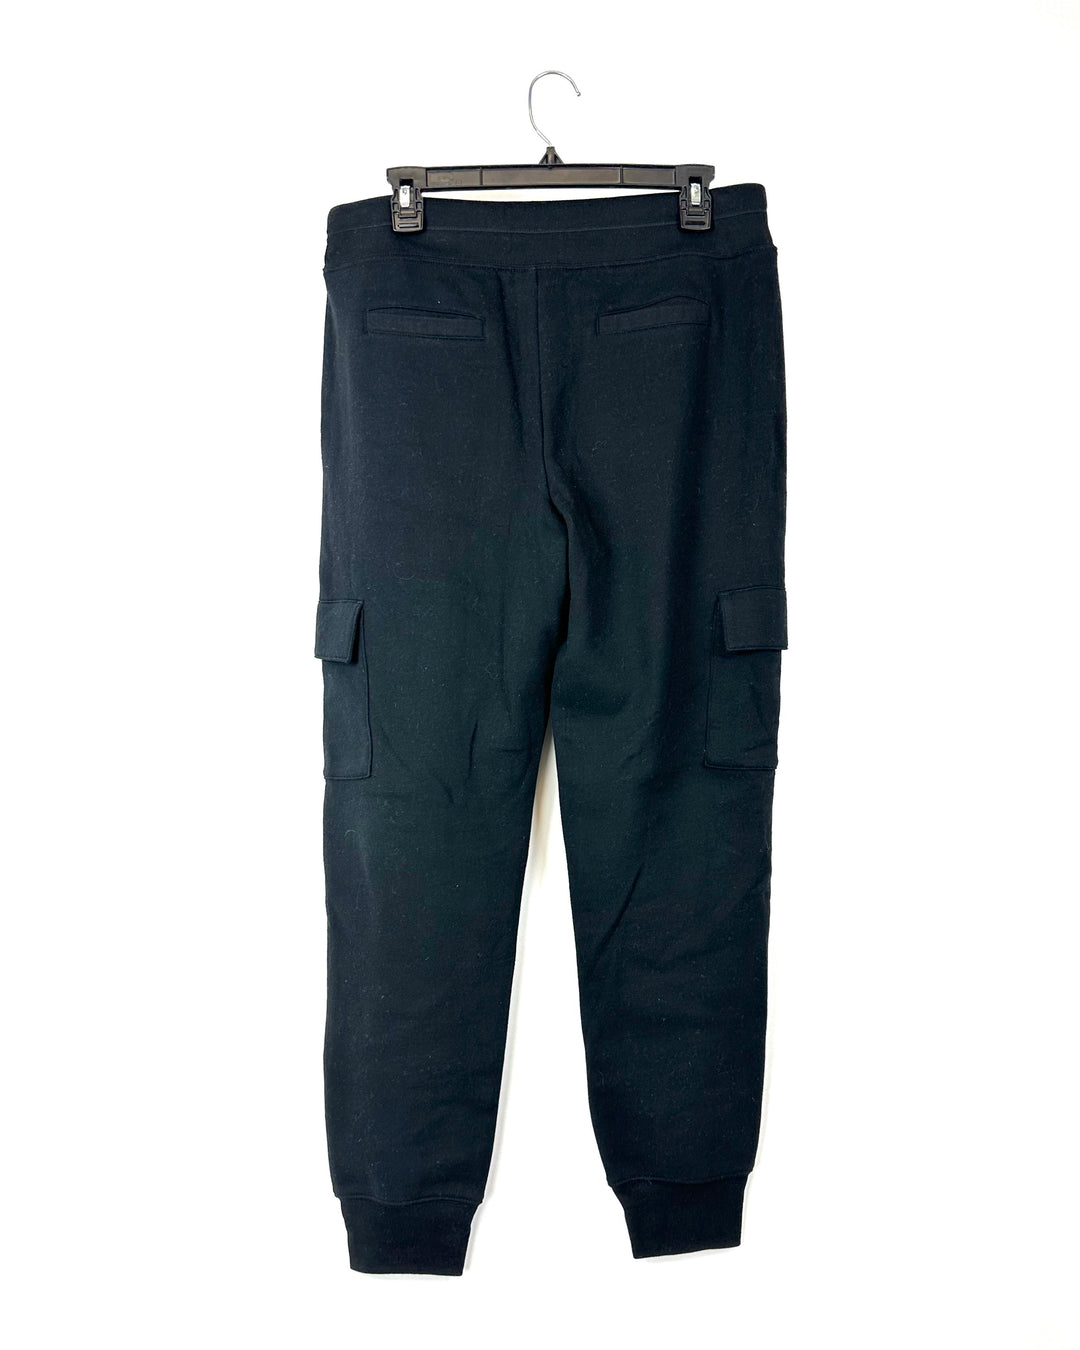 Black Joggers With Accordion Pockets - Small